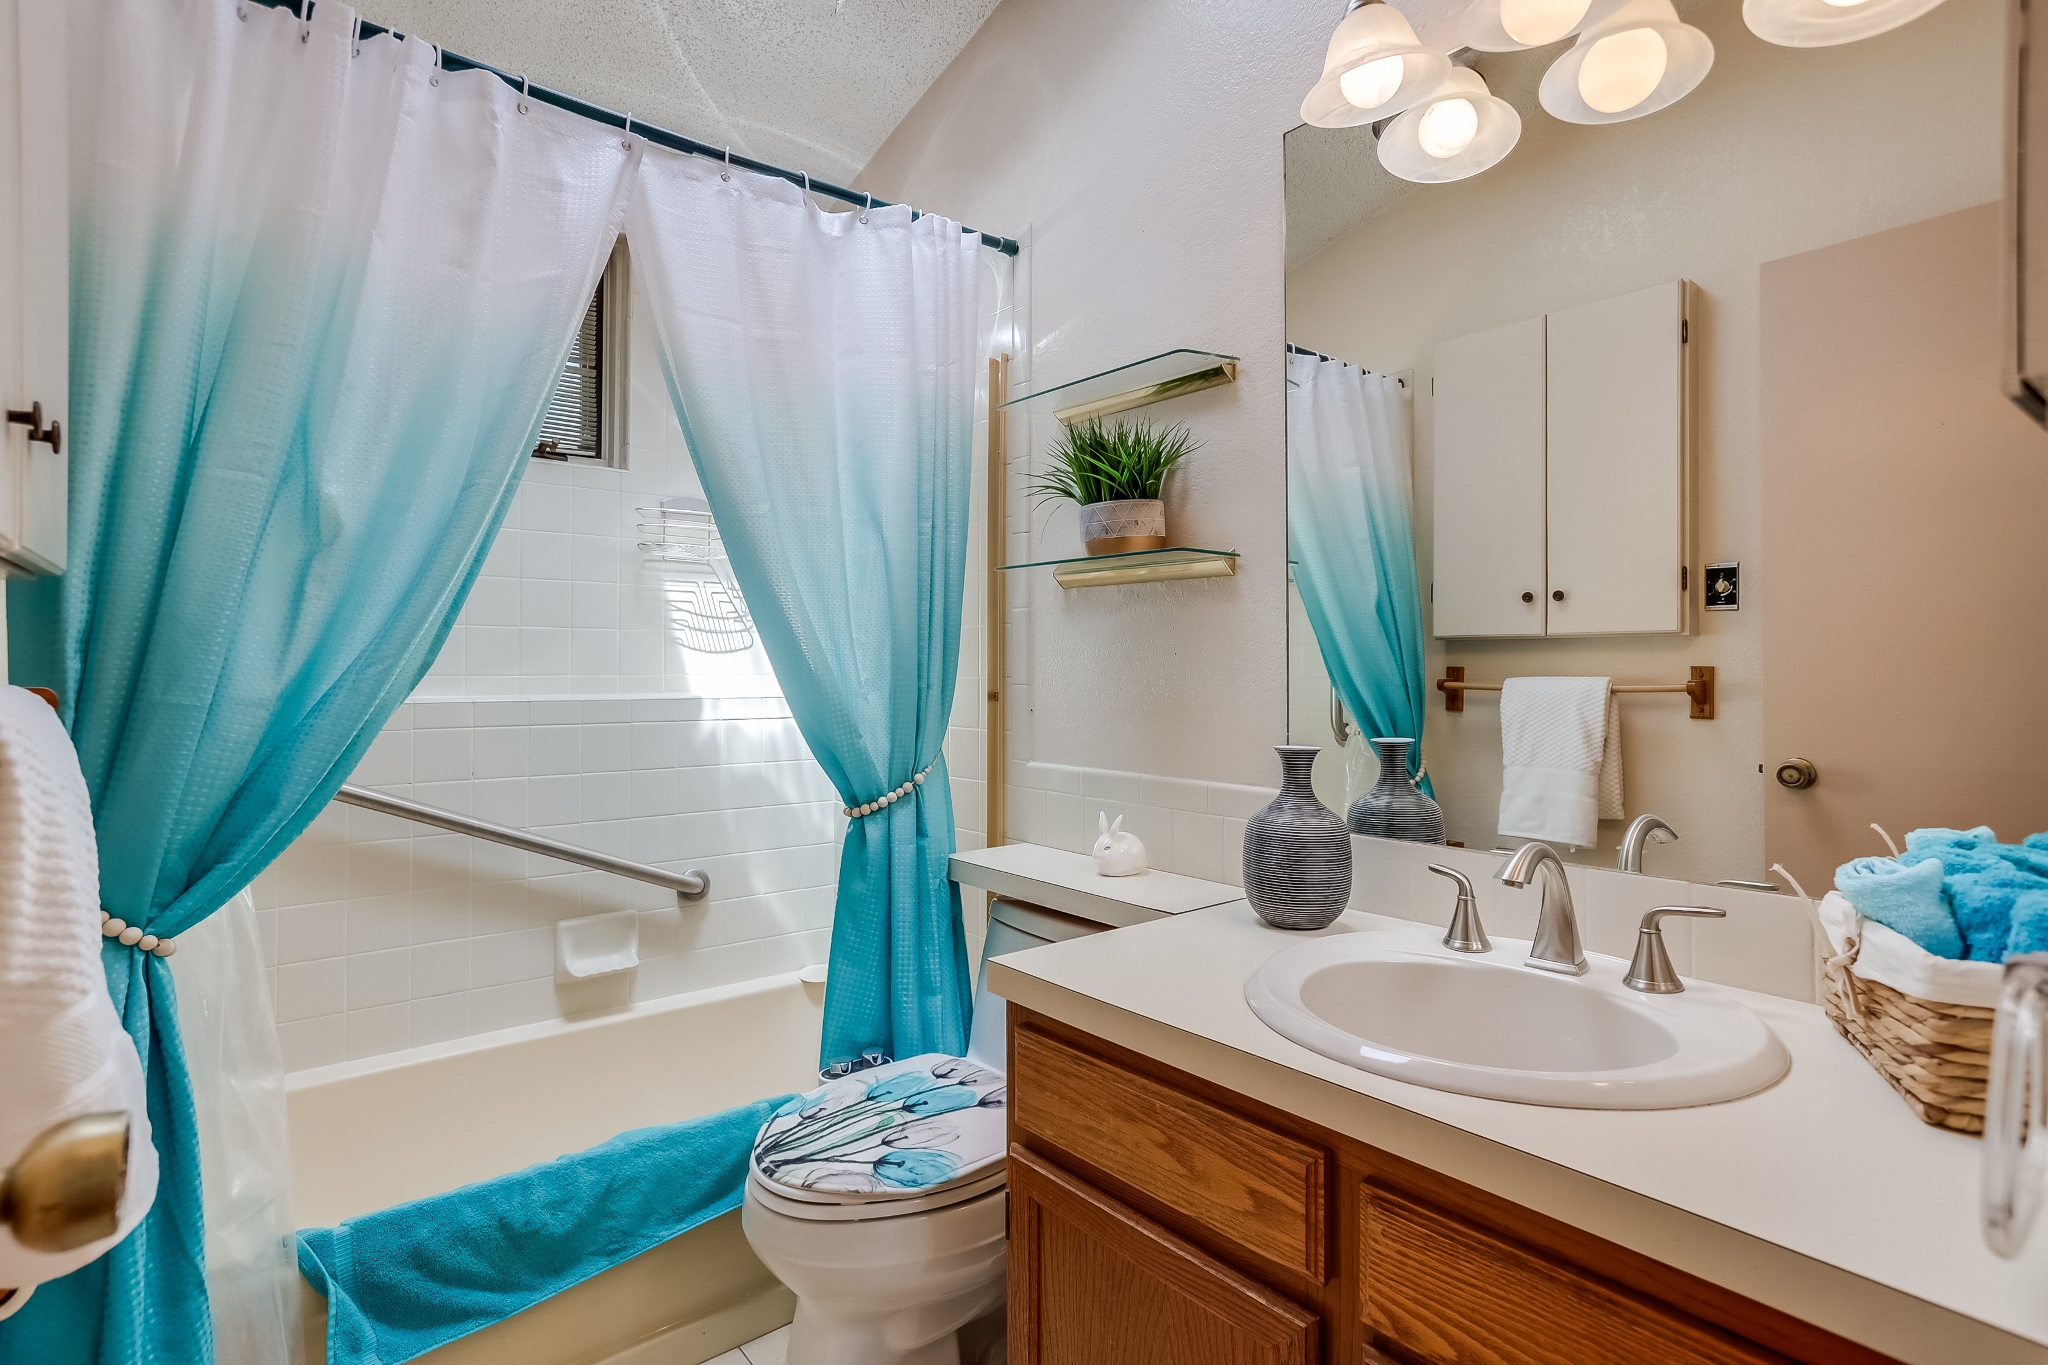 REAL ESTATE LISTING: 1409 Cannon St Louisville Master Bath